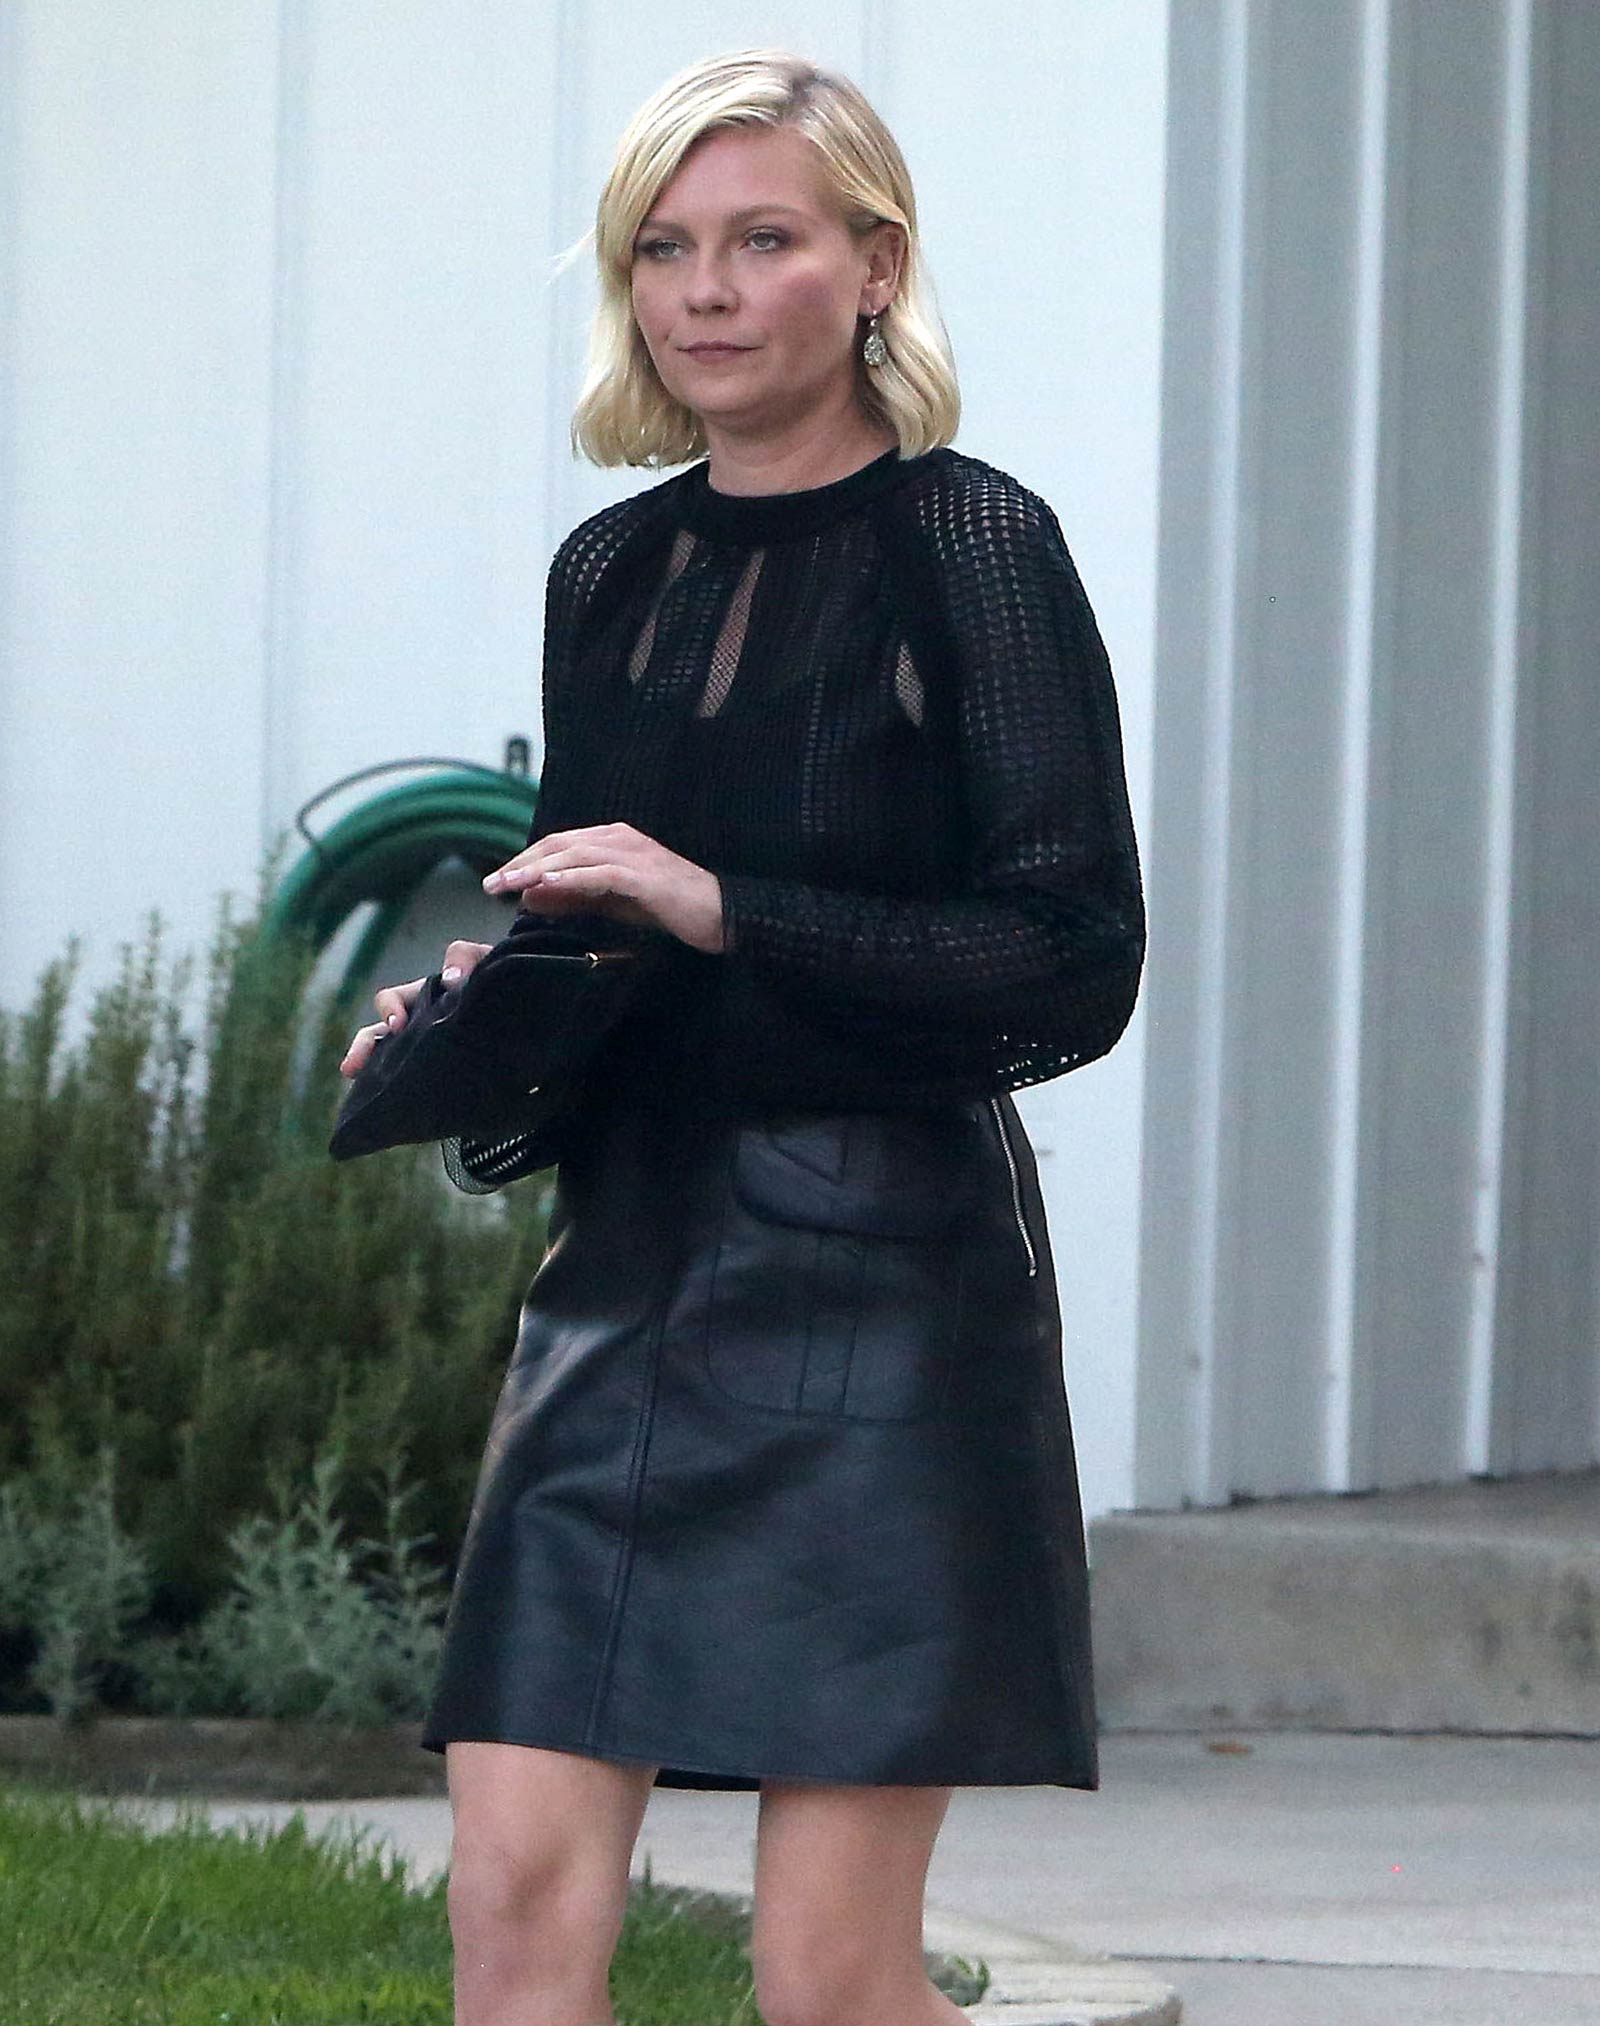 Kirsten Dunst getting into a limo outside her house